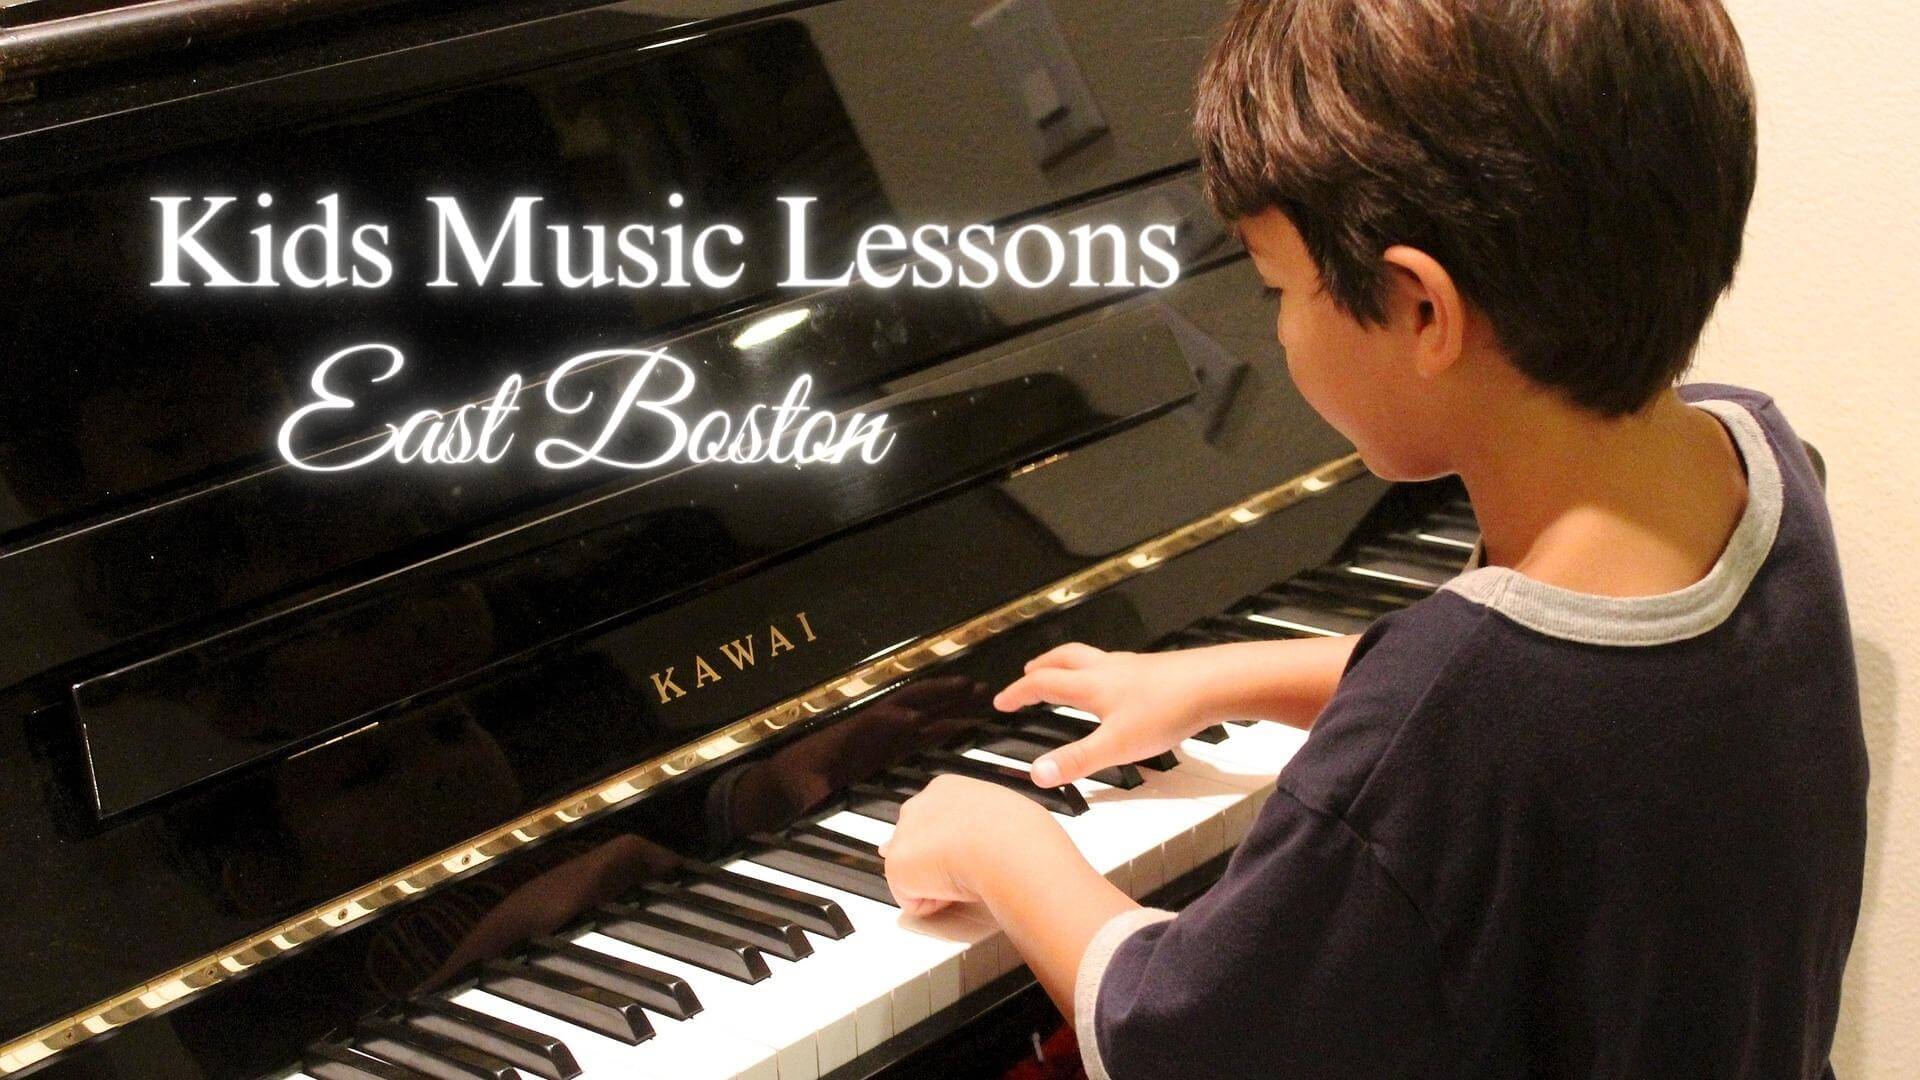 Welcome to East Boston: A Haven for Child-Friendly Music Lessons